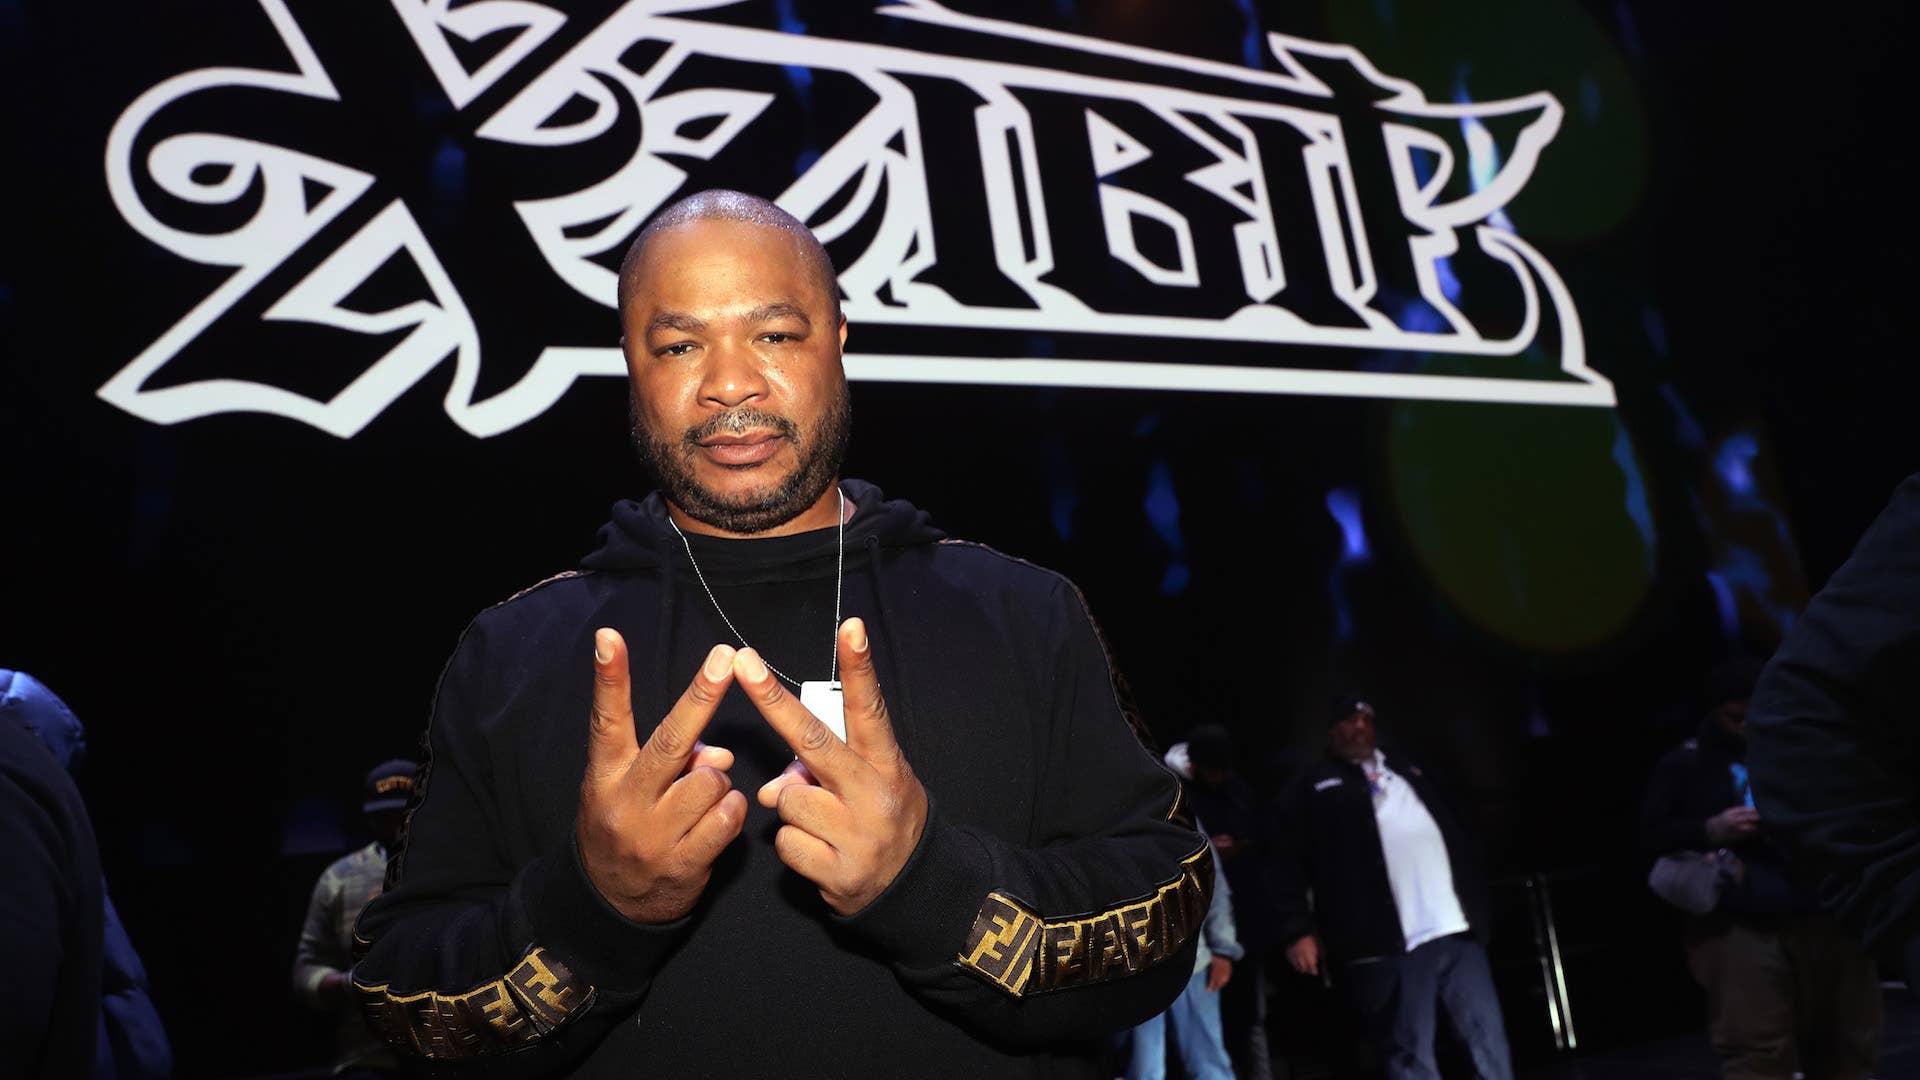 Xzibit attends the Loud Records 25th Anniversary Concert